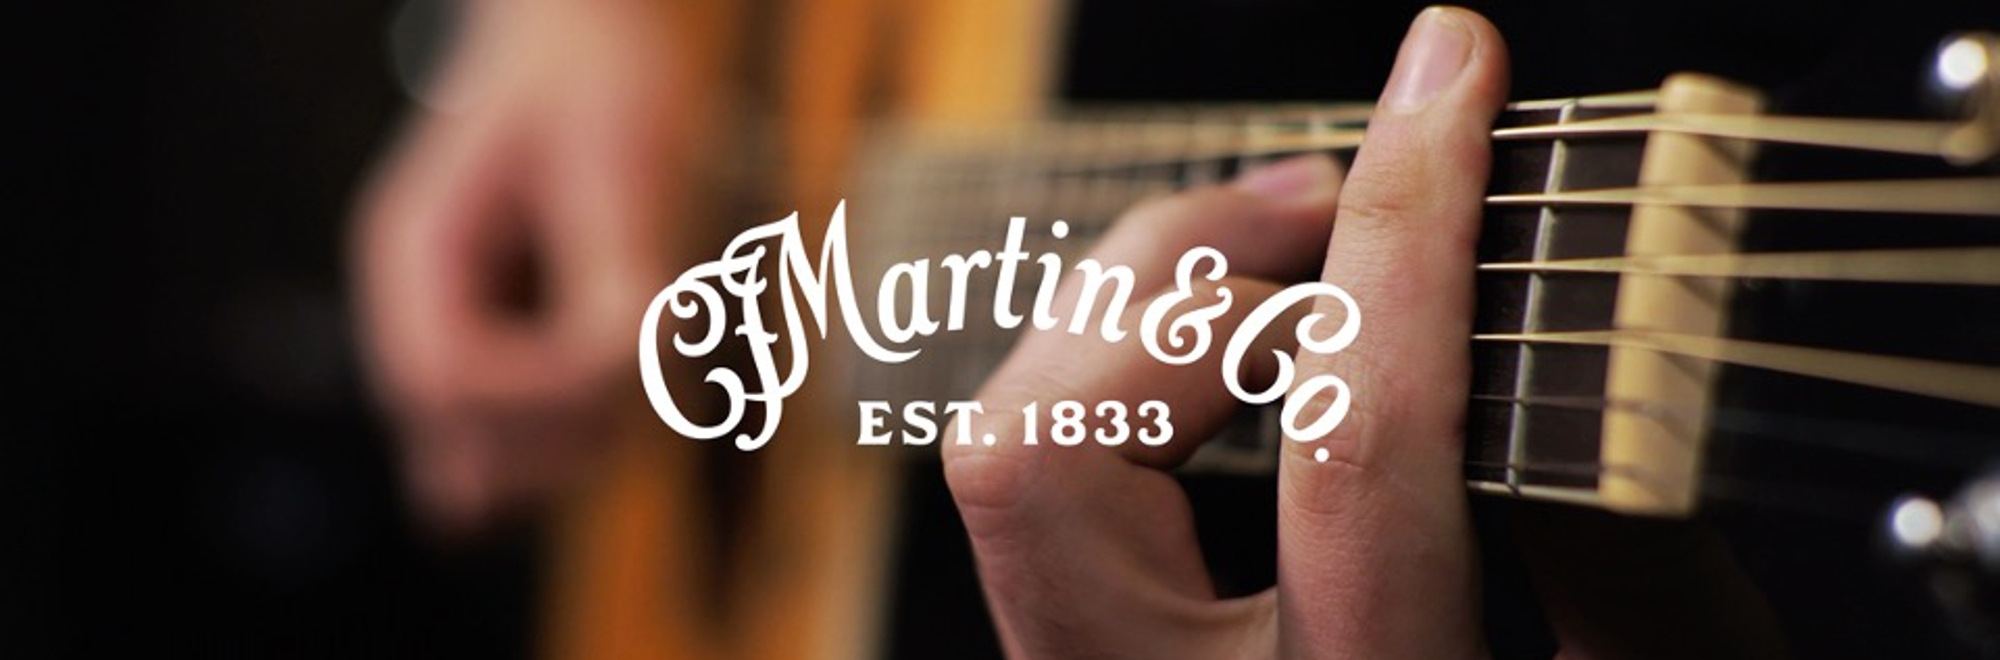 Heritage brand Martin Guitar receives brand refresh from Coley Porter Bell